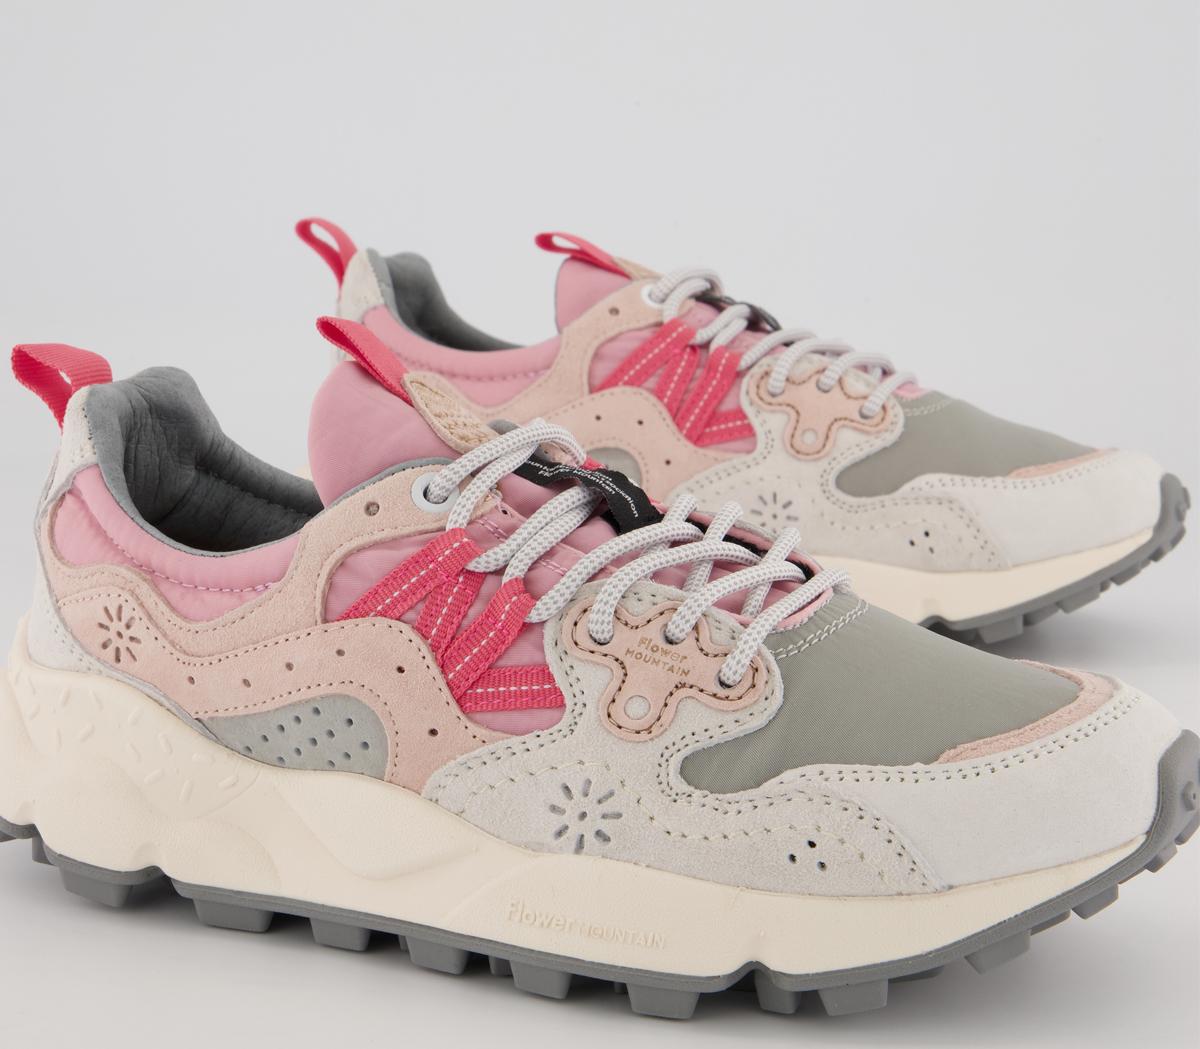 Flower Mountain Yamano 3 Trainers W Grey Pink - Women's Trainers